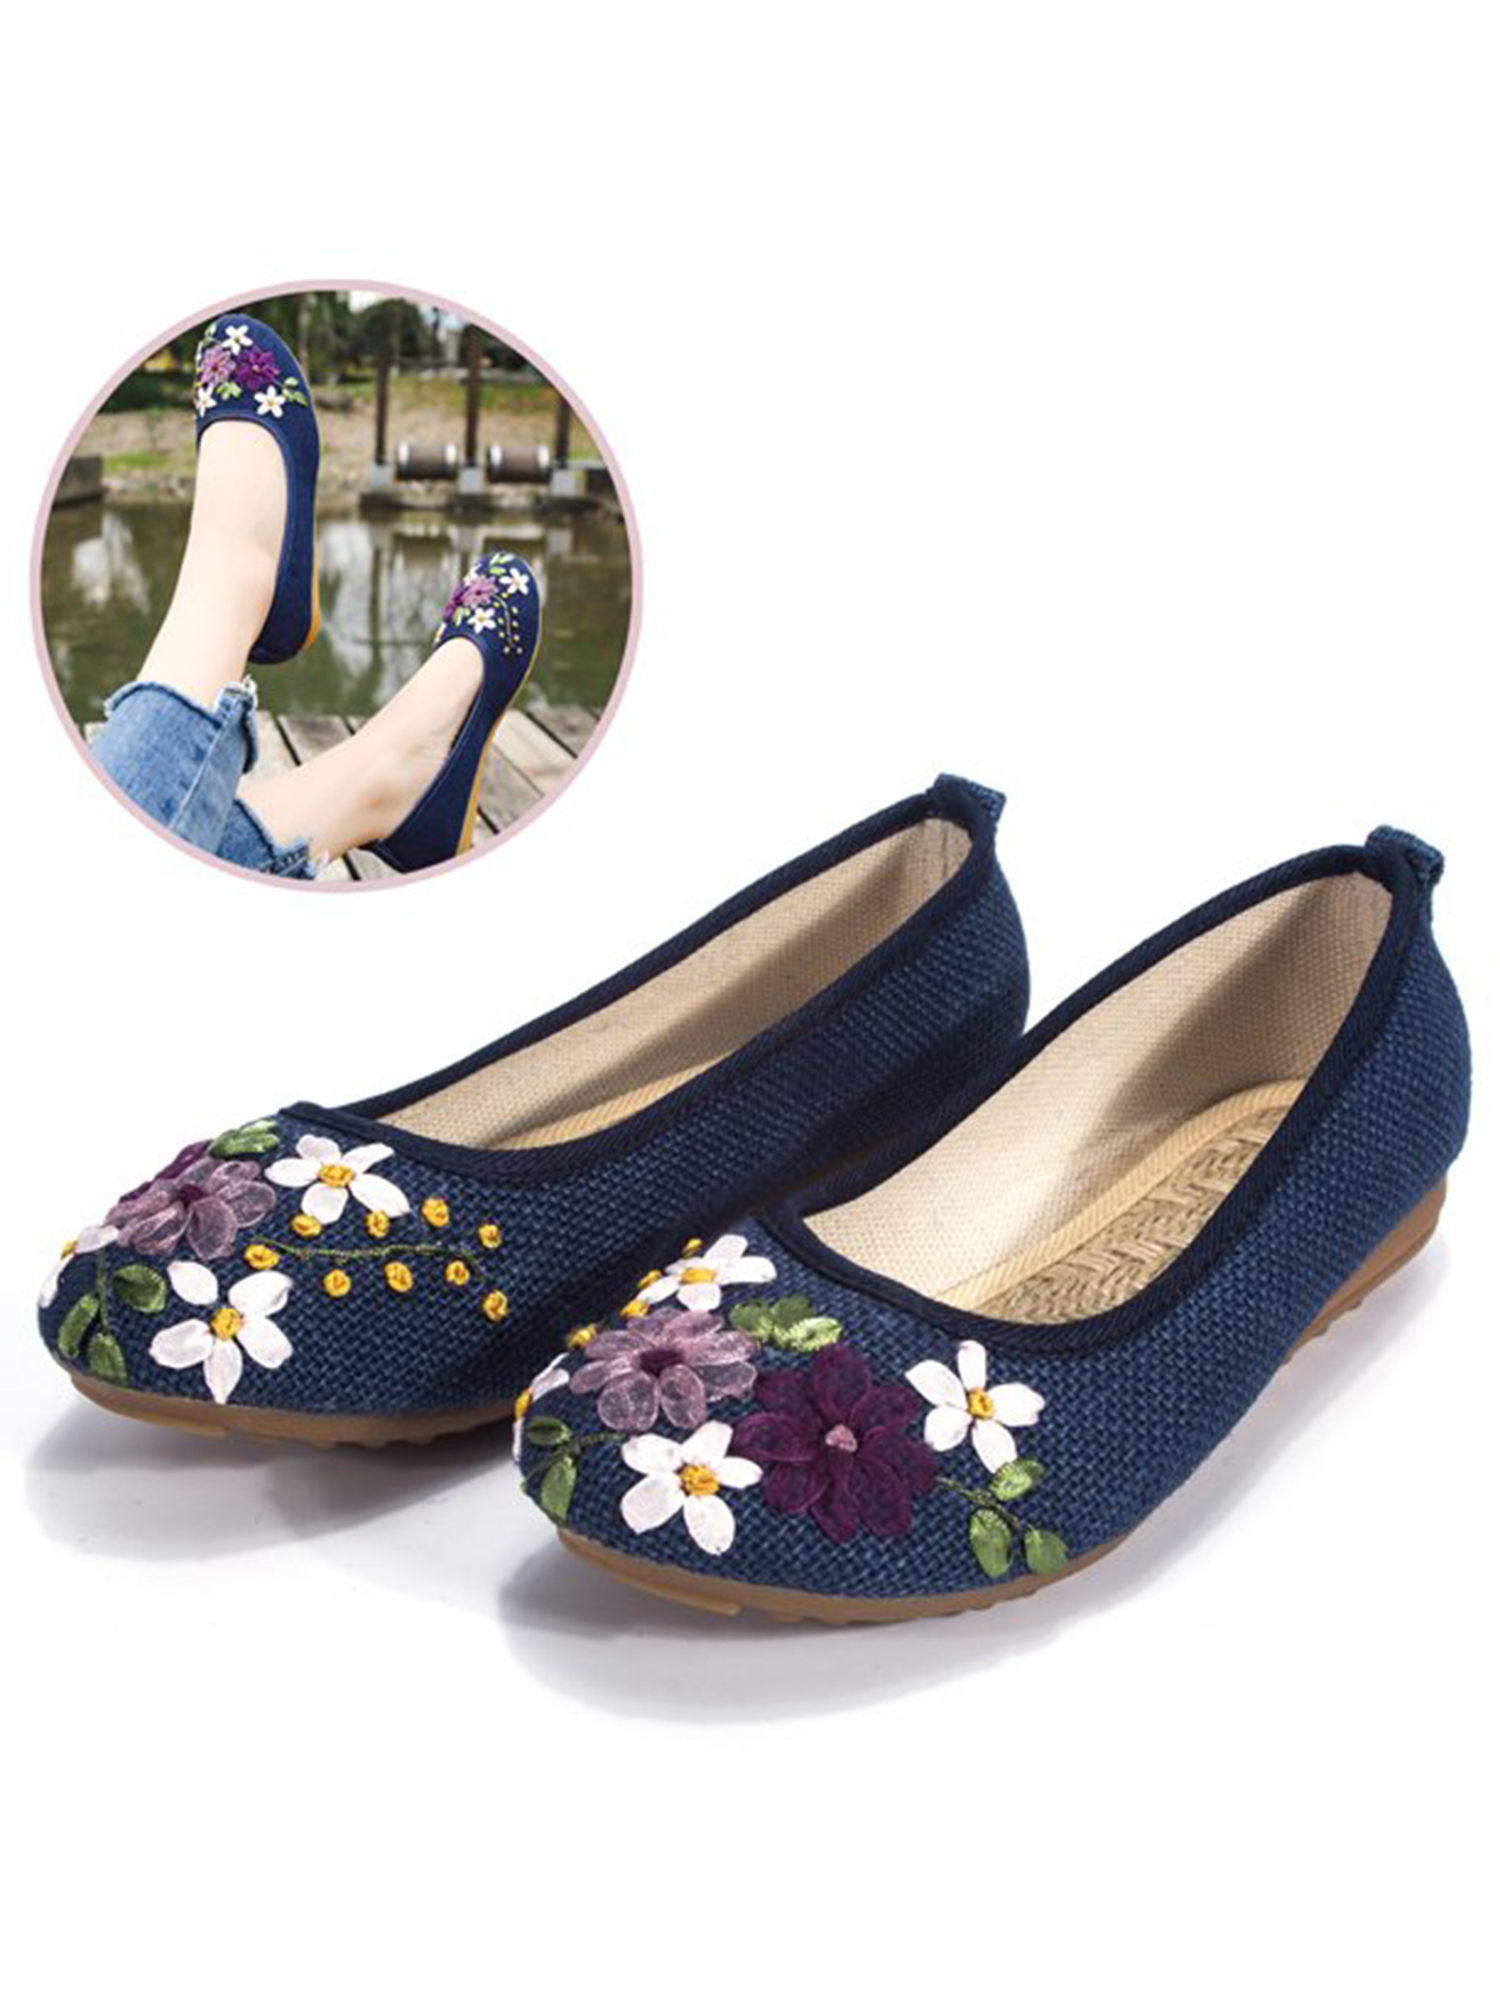 FANNYC Womens Women's Ethnic Style Casual Fit Flat Office Embroidered Shoes Ballet Flats Floral Embroidered Cut Platform Shoe Slip On Casual Driving Loafers Hemp soled shoes - image 2 of 7